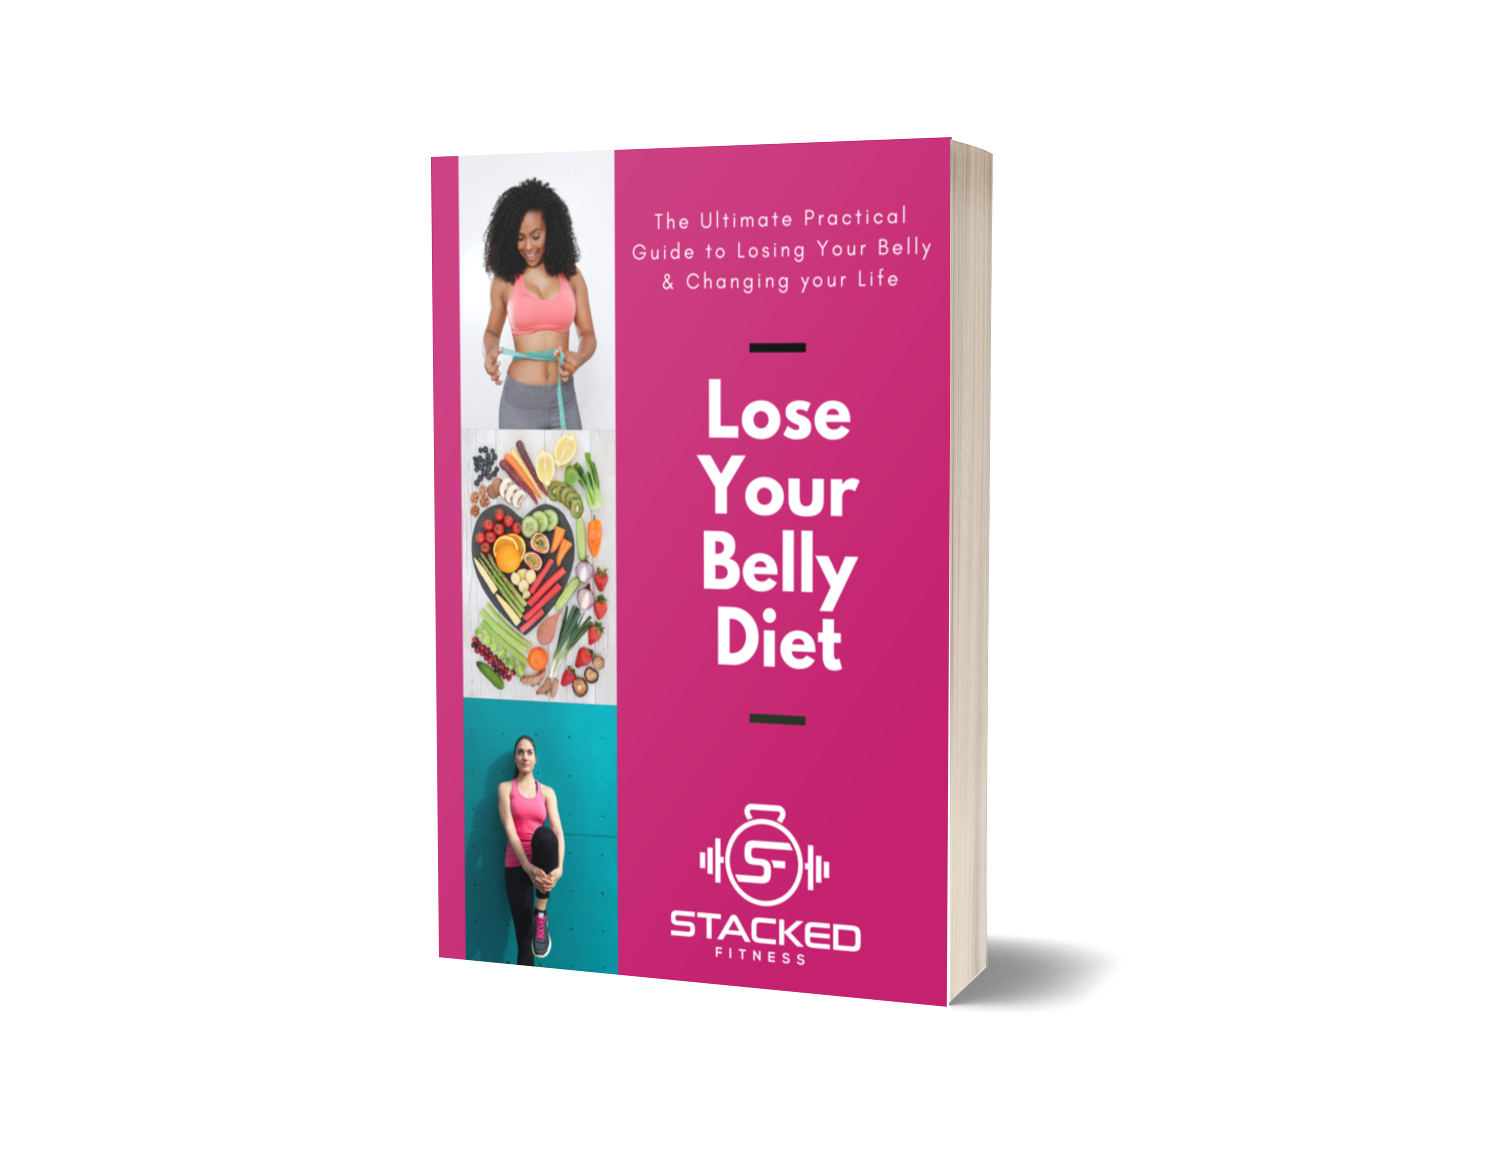 Lose Your Belly Diet FREE ebook